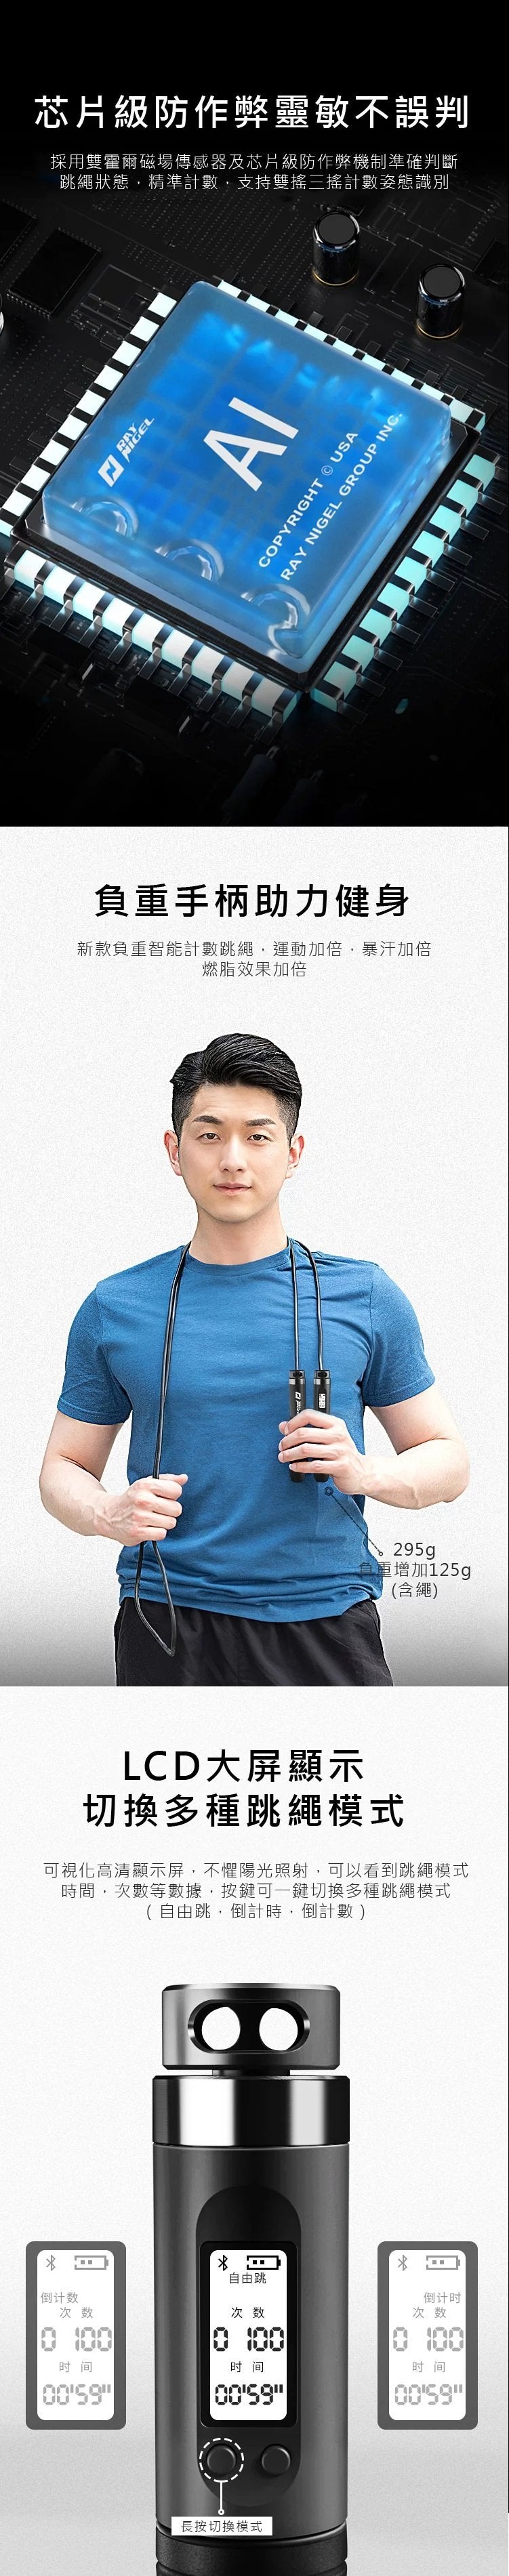 Raynigel - RAYNIGEL Intelligent Counting Weighted Skipping Rope LS-T30 [Licensed in Hong Kong]